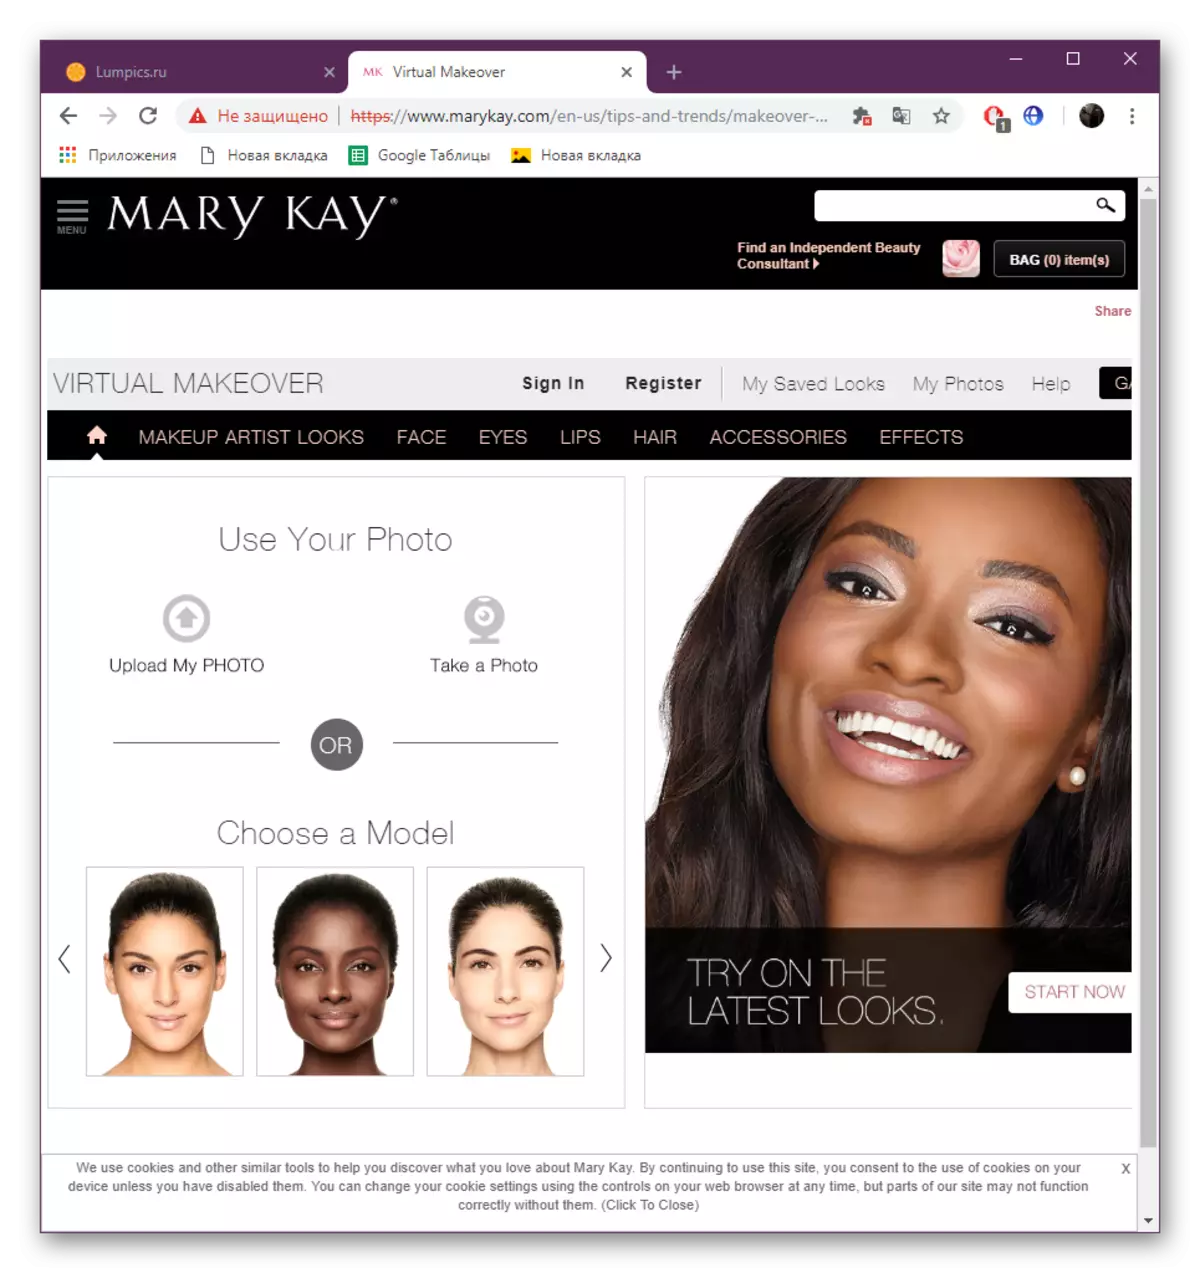 Virtual Makeup from Marykay